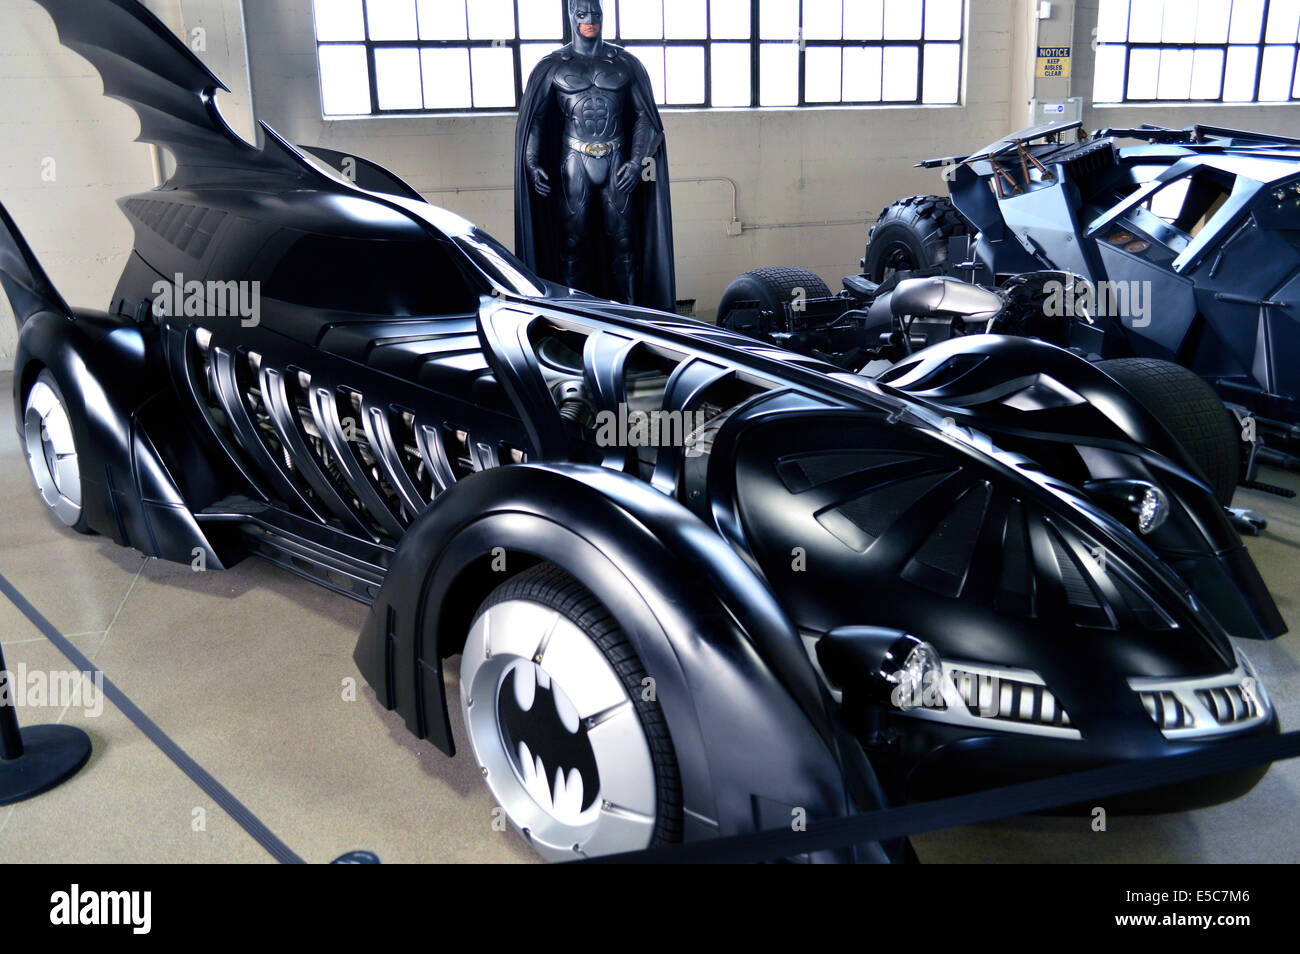 Car from the Batman film franchise at the Warner Bros Studio in Burbank,  Los Angeles Stock Photo - Alamy